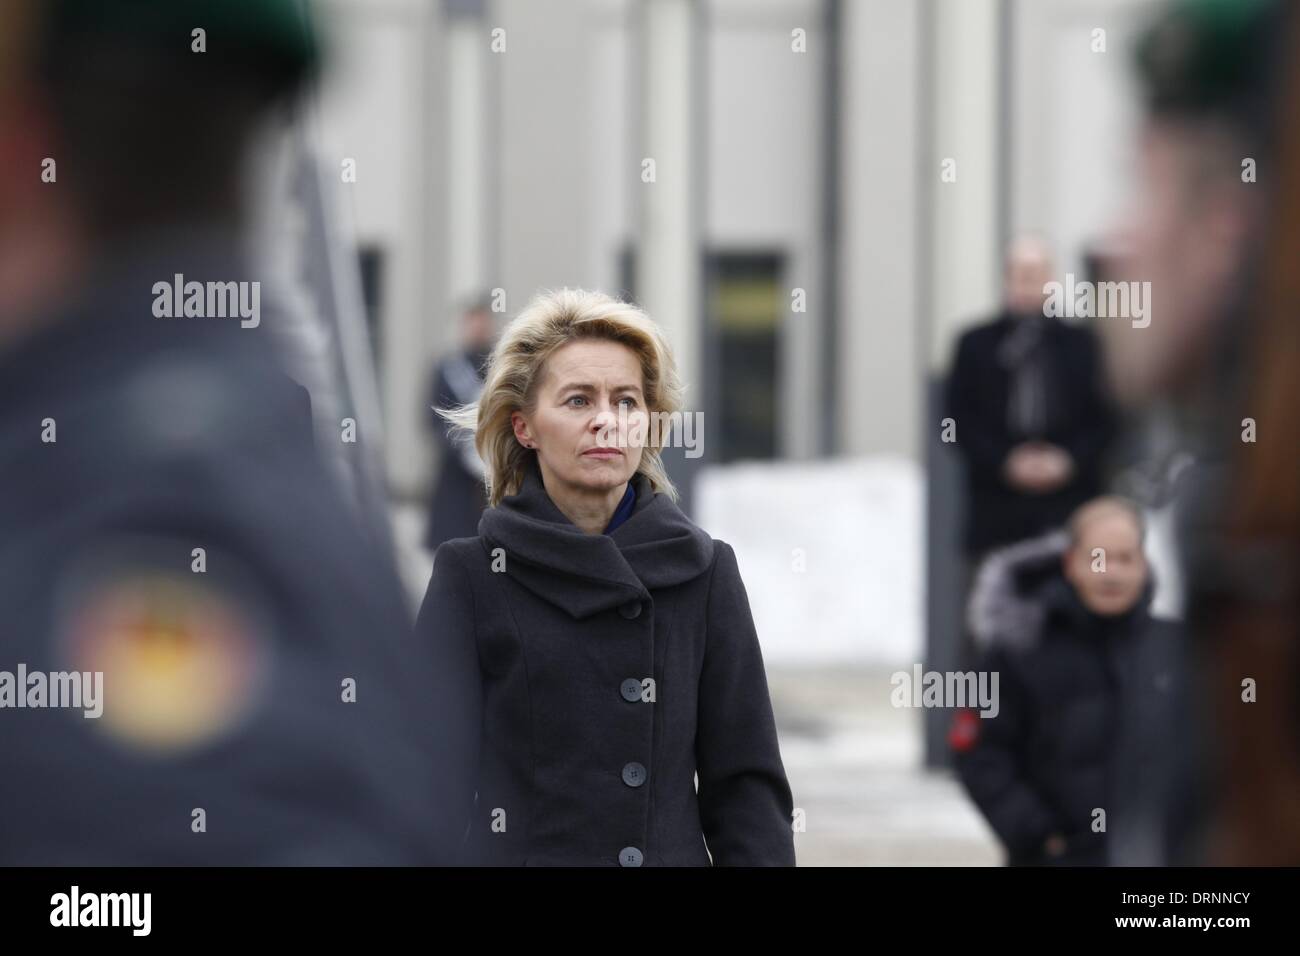 Berlin, Germany. 30th Jan, 2014. Ursula von der Leyen (CDU), Minister of Defence, receives the Israeli Secretary of Defense, Mosche ''Bogie'' Jaalon, with with military honors and give a joint press Statements, in Berlin, Germany, on January 30, 2014. / Pictures: Ursula von der Leyen (CDU), Minister of Defence. © Reynaldo Paganelli/NurPhoto/ZUMAPRESS.com/Alamy Live News Stock Photo